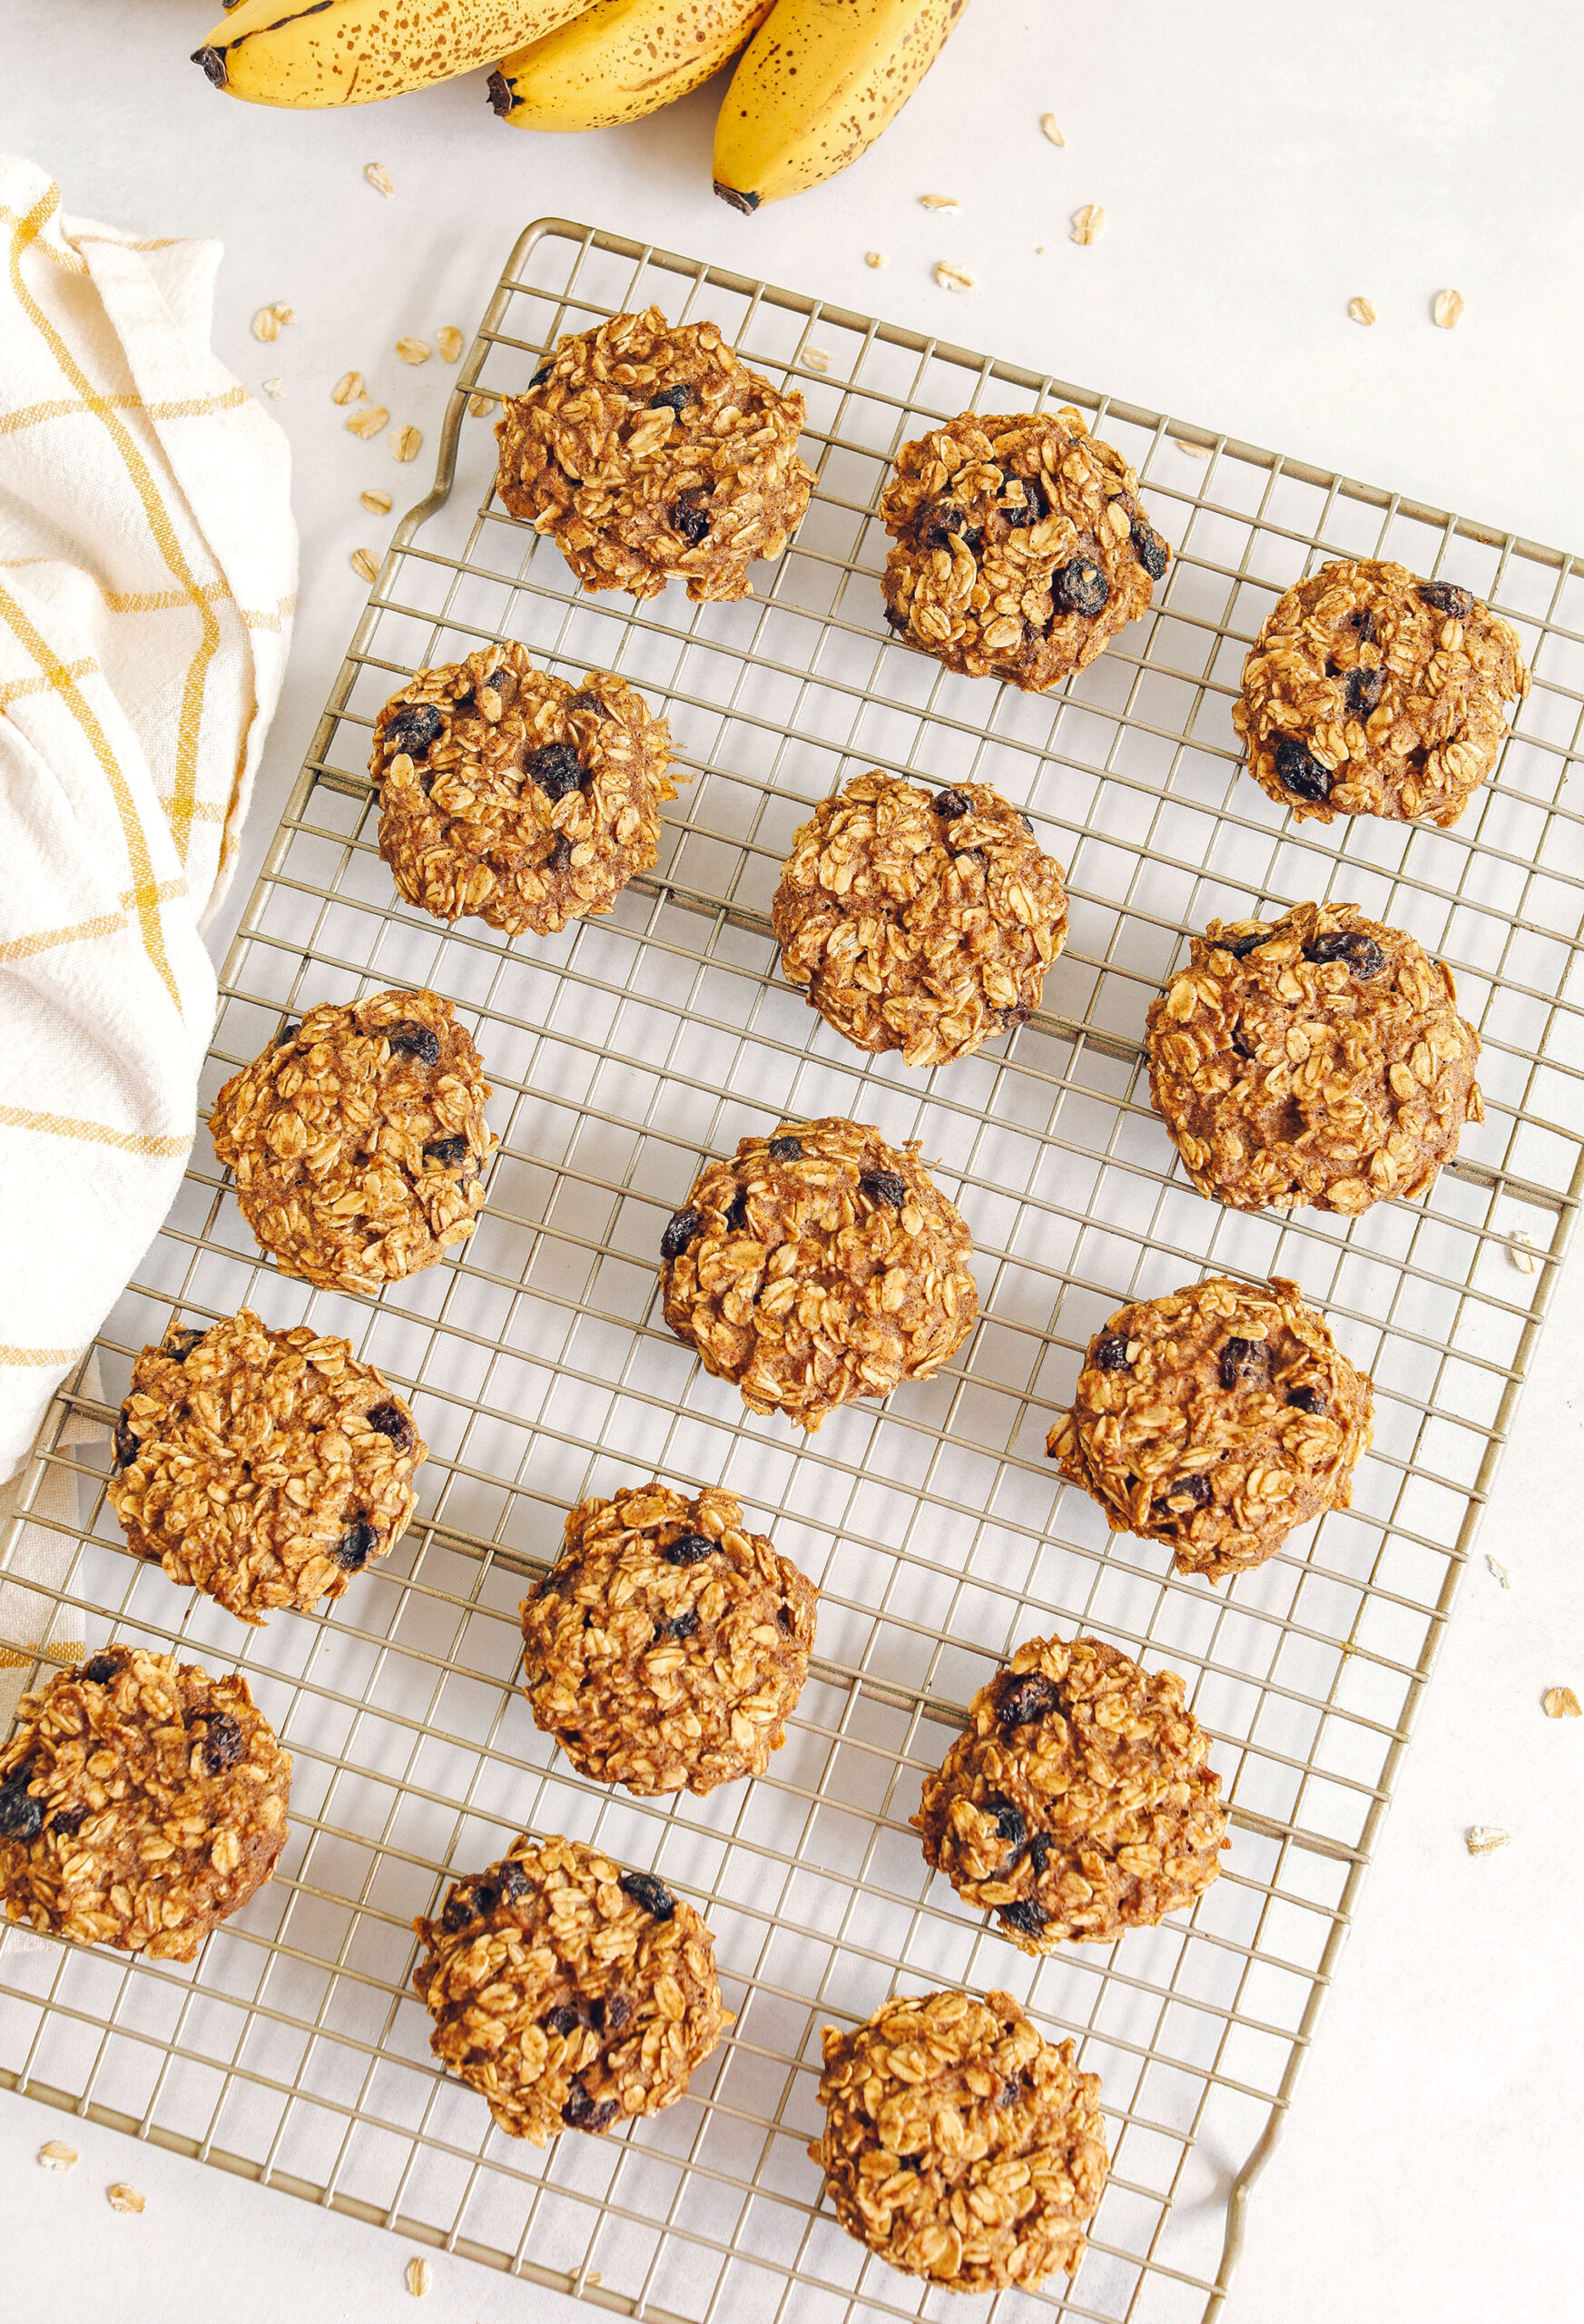 Chewy and delicious Banana Oatmeal Breakfast Cookies easily made with simple, wholesome ingredients and naturally sweetened for the perfect healthy cookie you can enjoy for breakfast or serve as an after school snack!